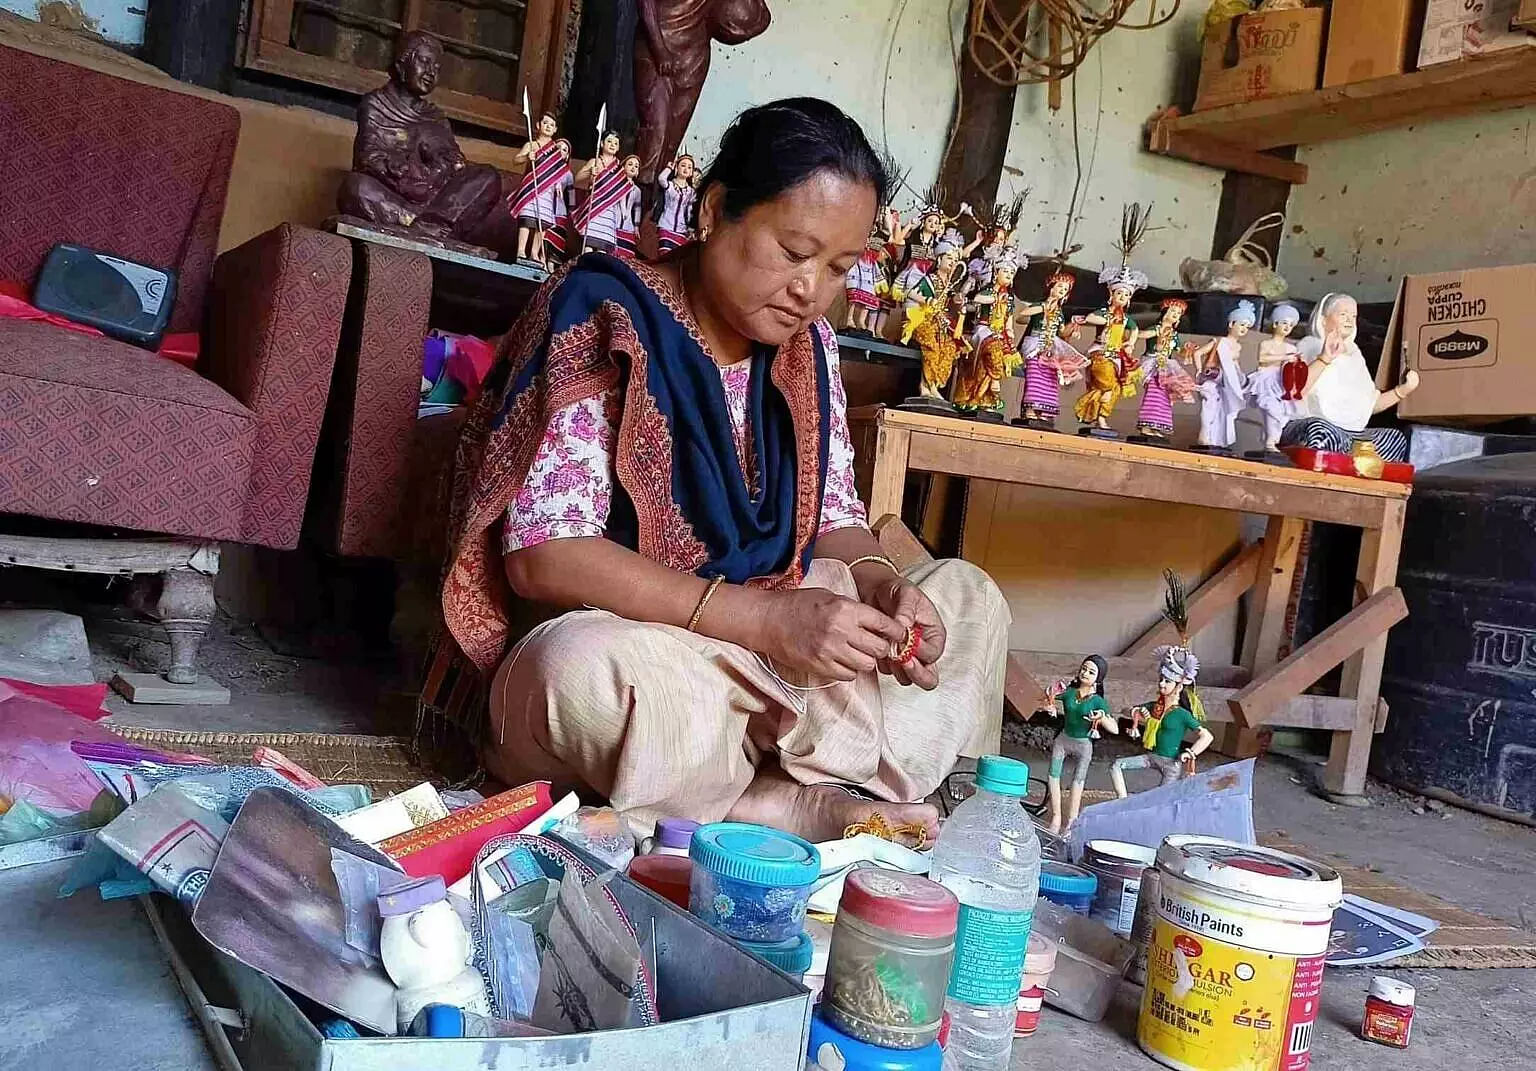 Manipurs Doll Maker: Know About the 58-year-old Doll Making Artist from Manipur